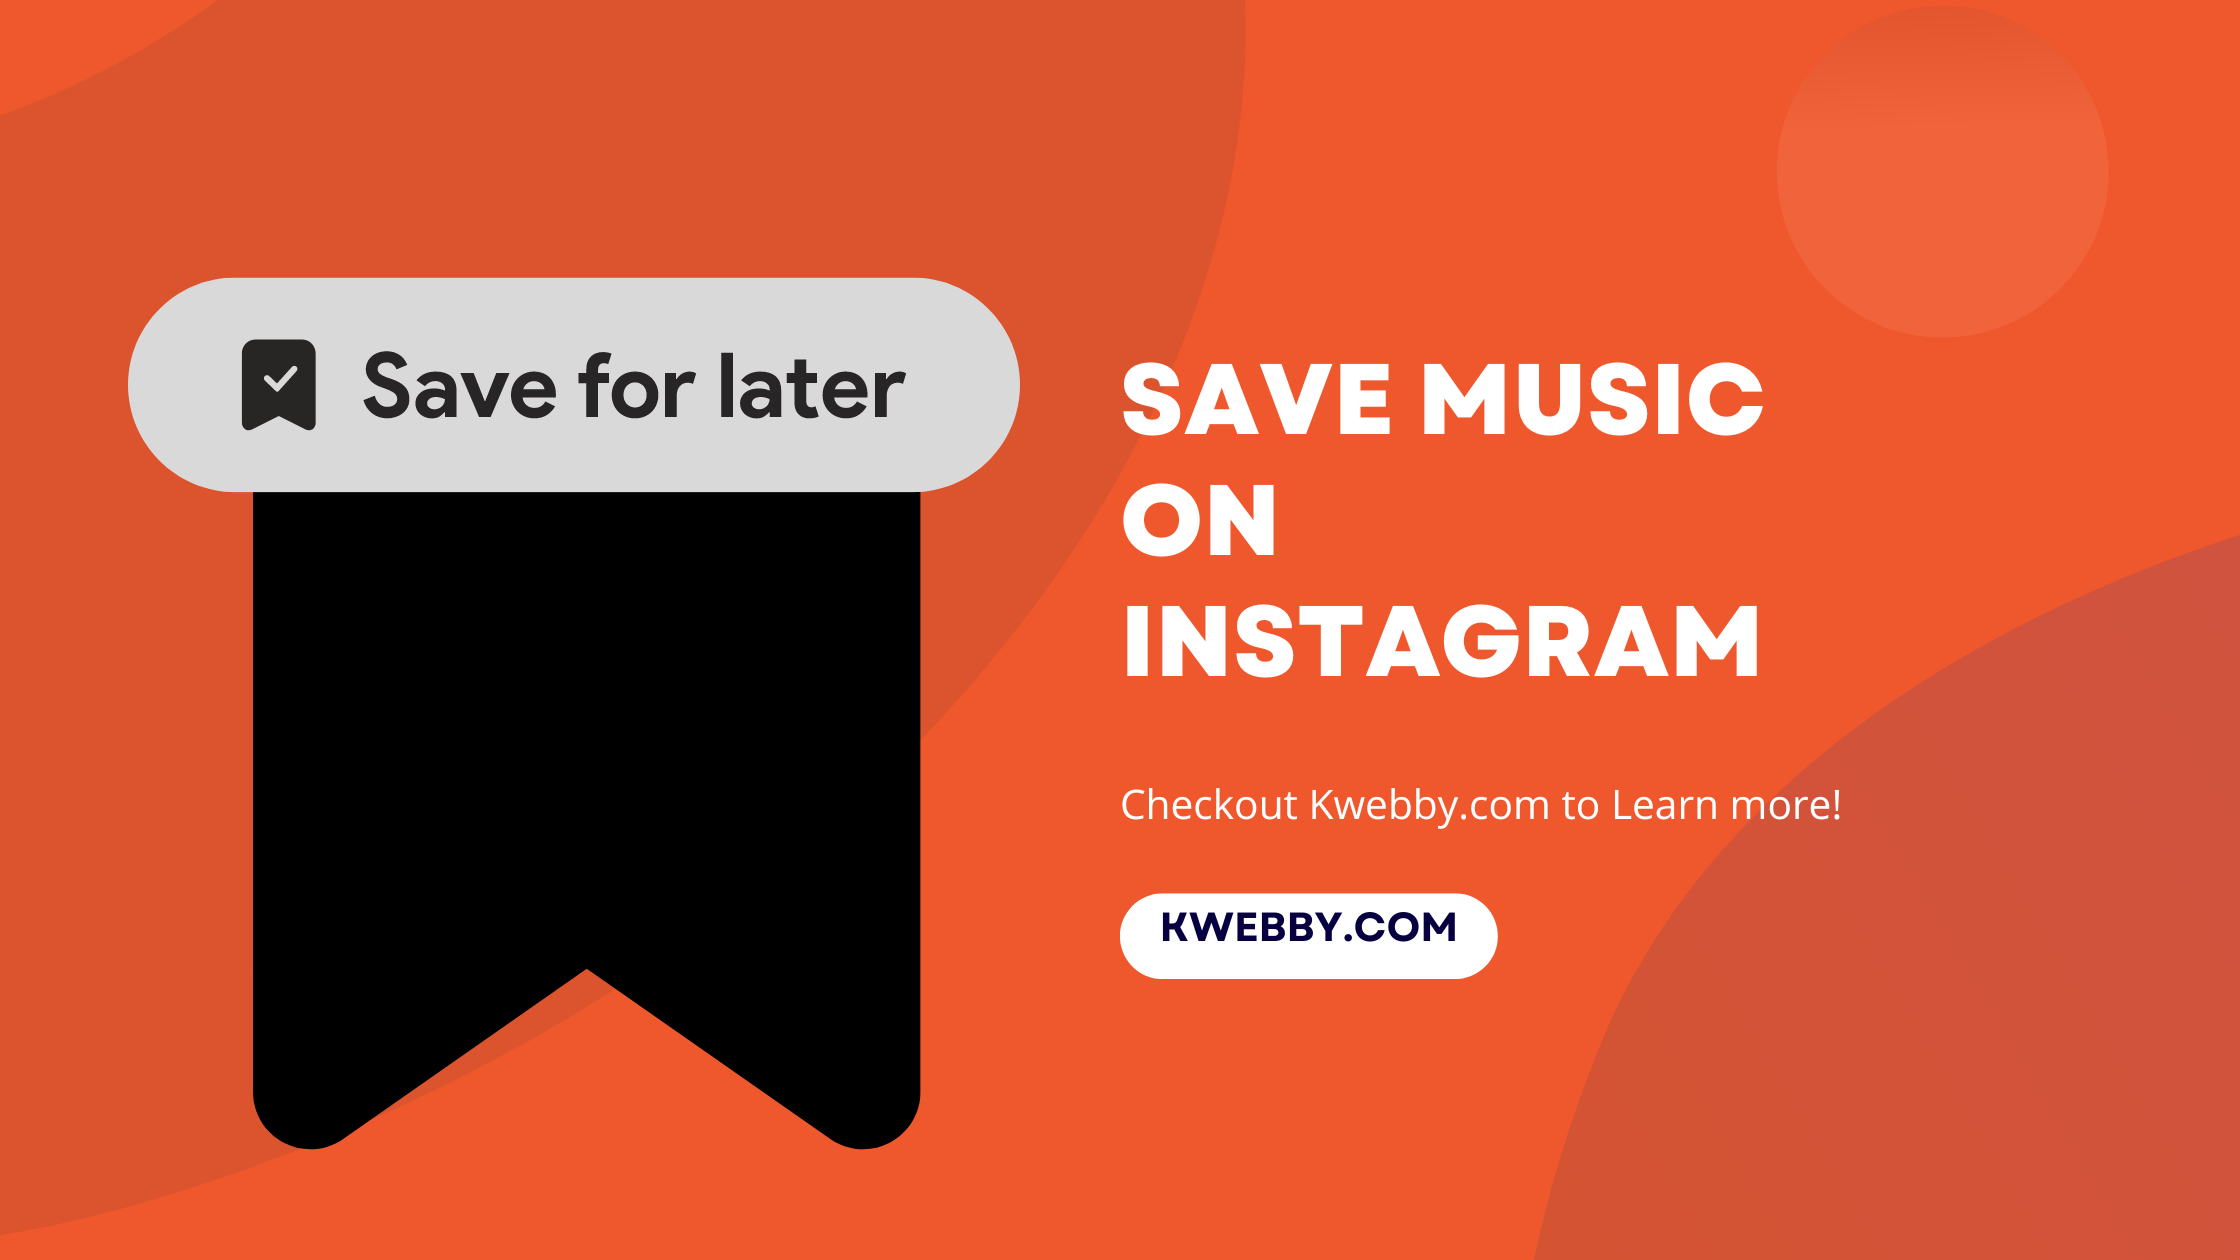 How to Save Music and Use the “Saved Music” Feature on Instagram